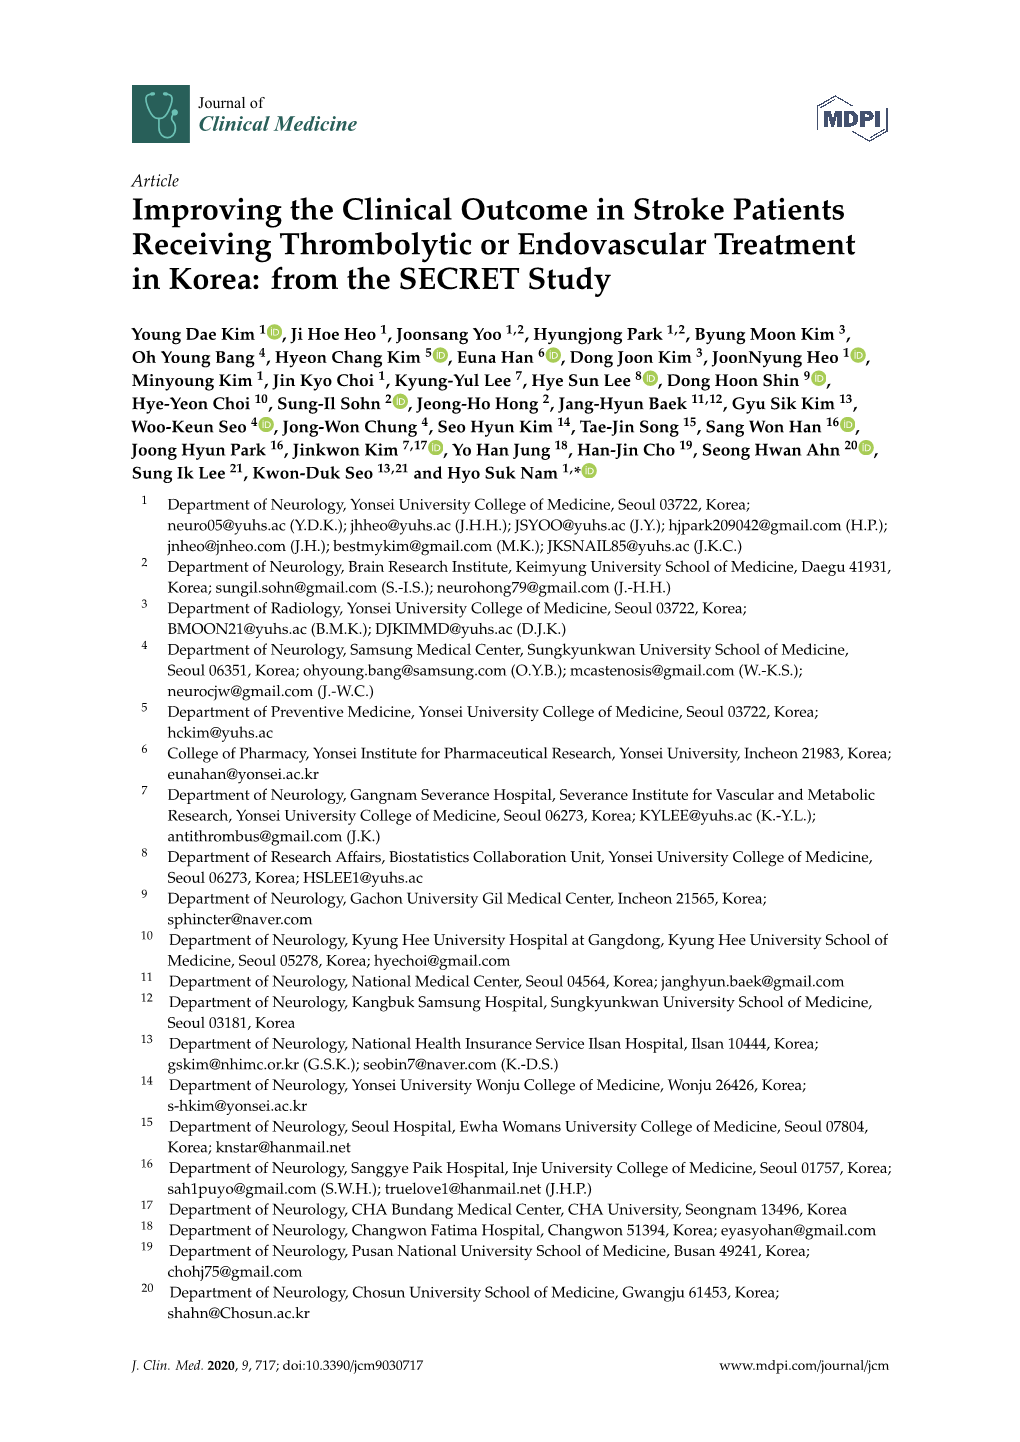 Improving the Clinical Outcome in Stroke Patients Receiving Thrombolytic Or Endovascular Treatment in Korea: from the SECRET Study